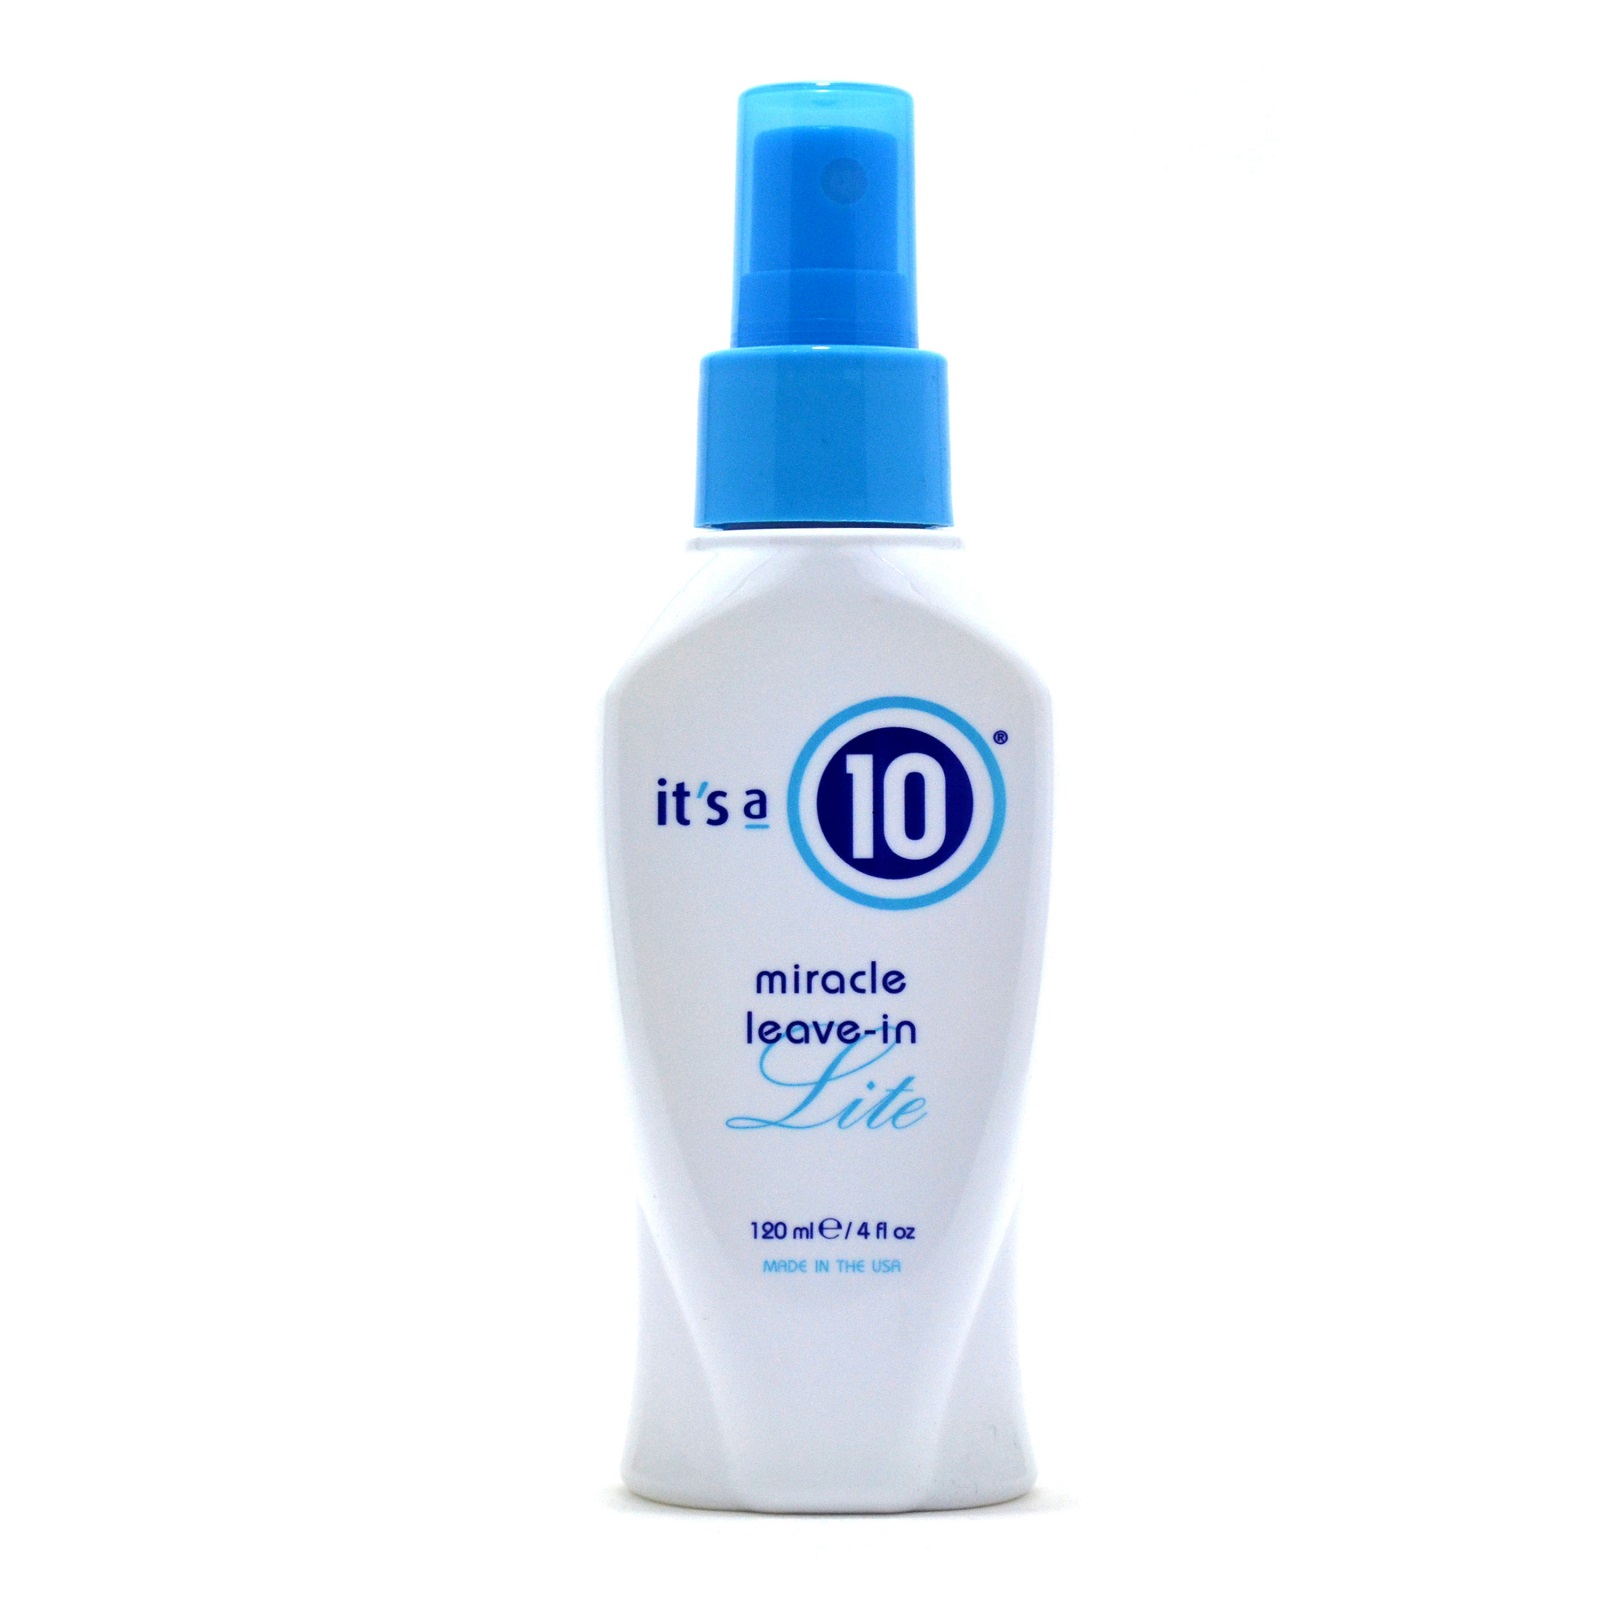 Its a 10 Miracle Leave In Product  Lite  4 fl oz (120 ml)